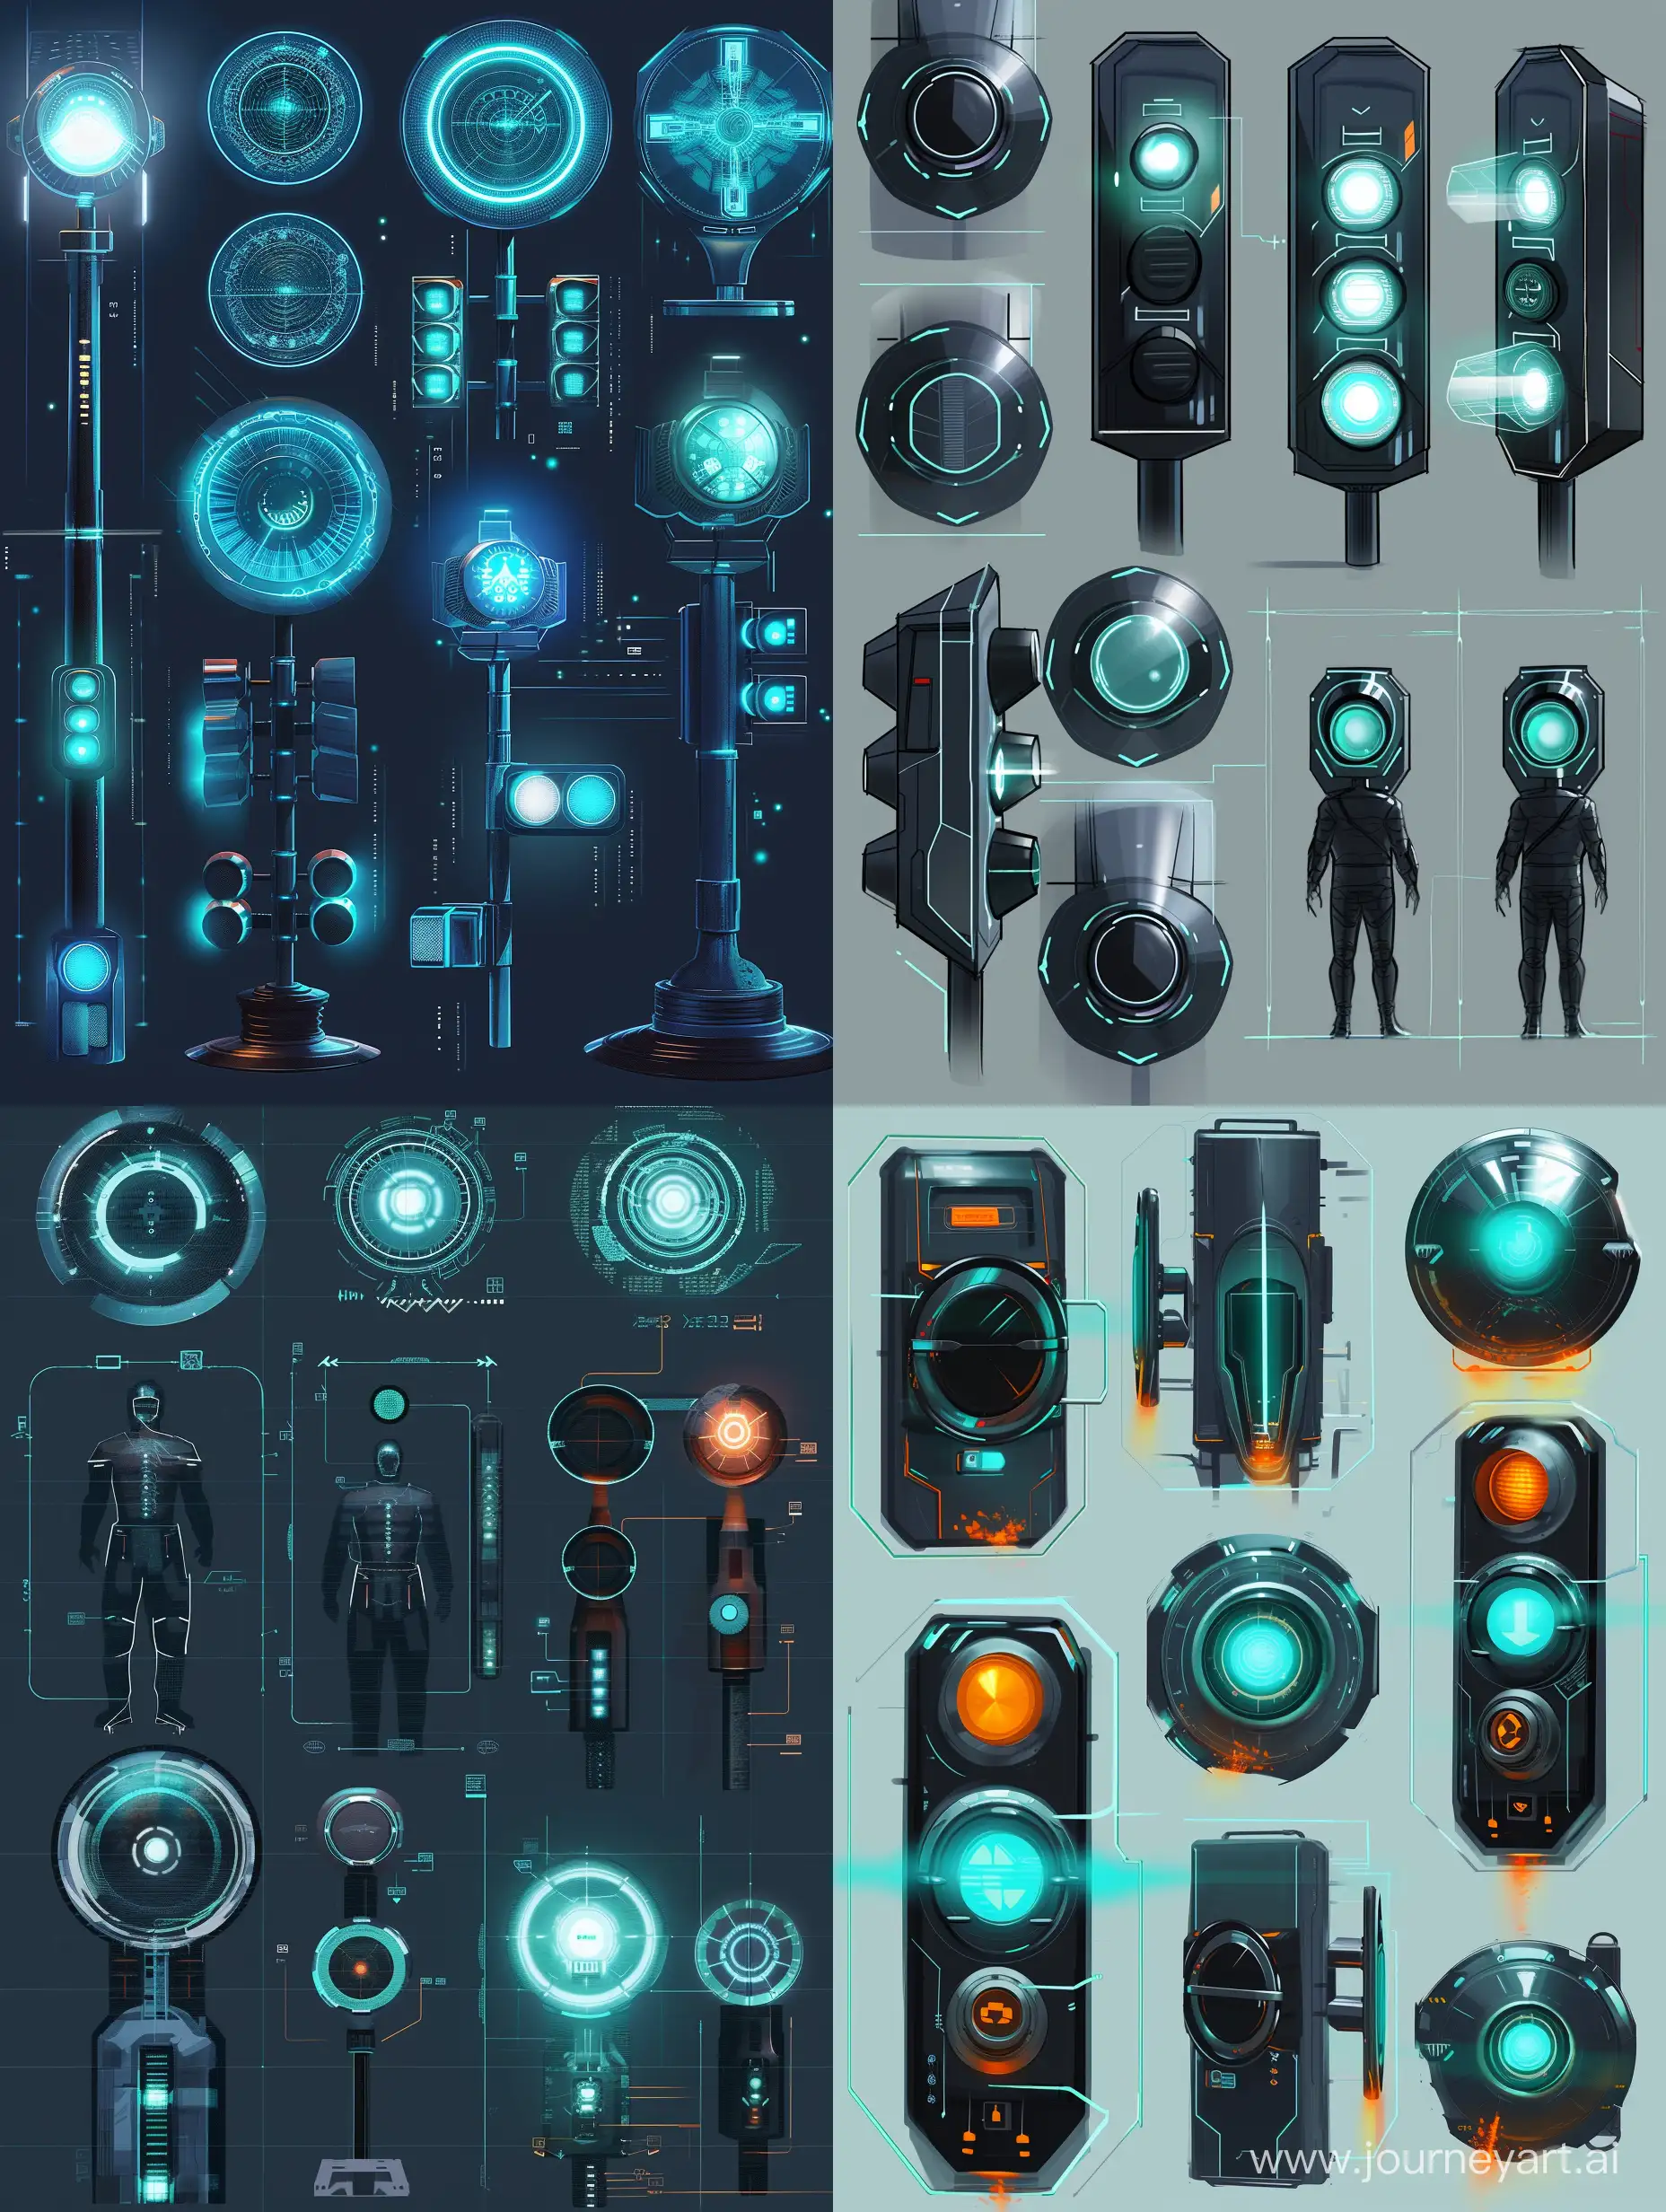 Focus on the design aspect by generating various concepts for the holographic traffic lights. Experiment with shapes, sizes, and colors that convey a sense of futuristic functionality.